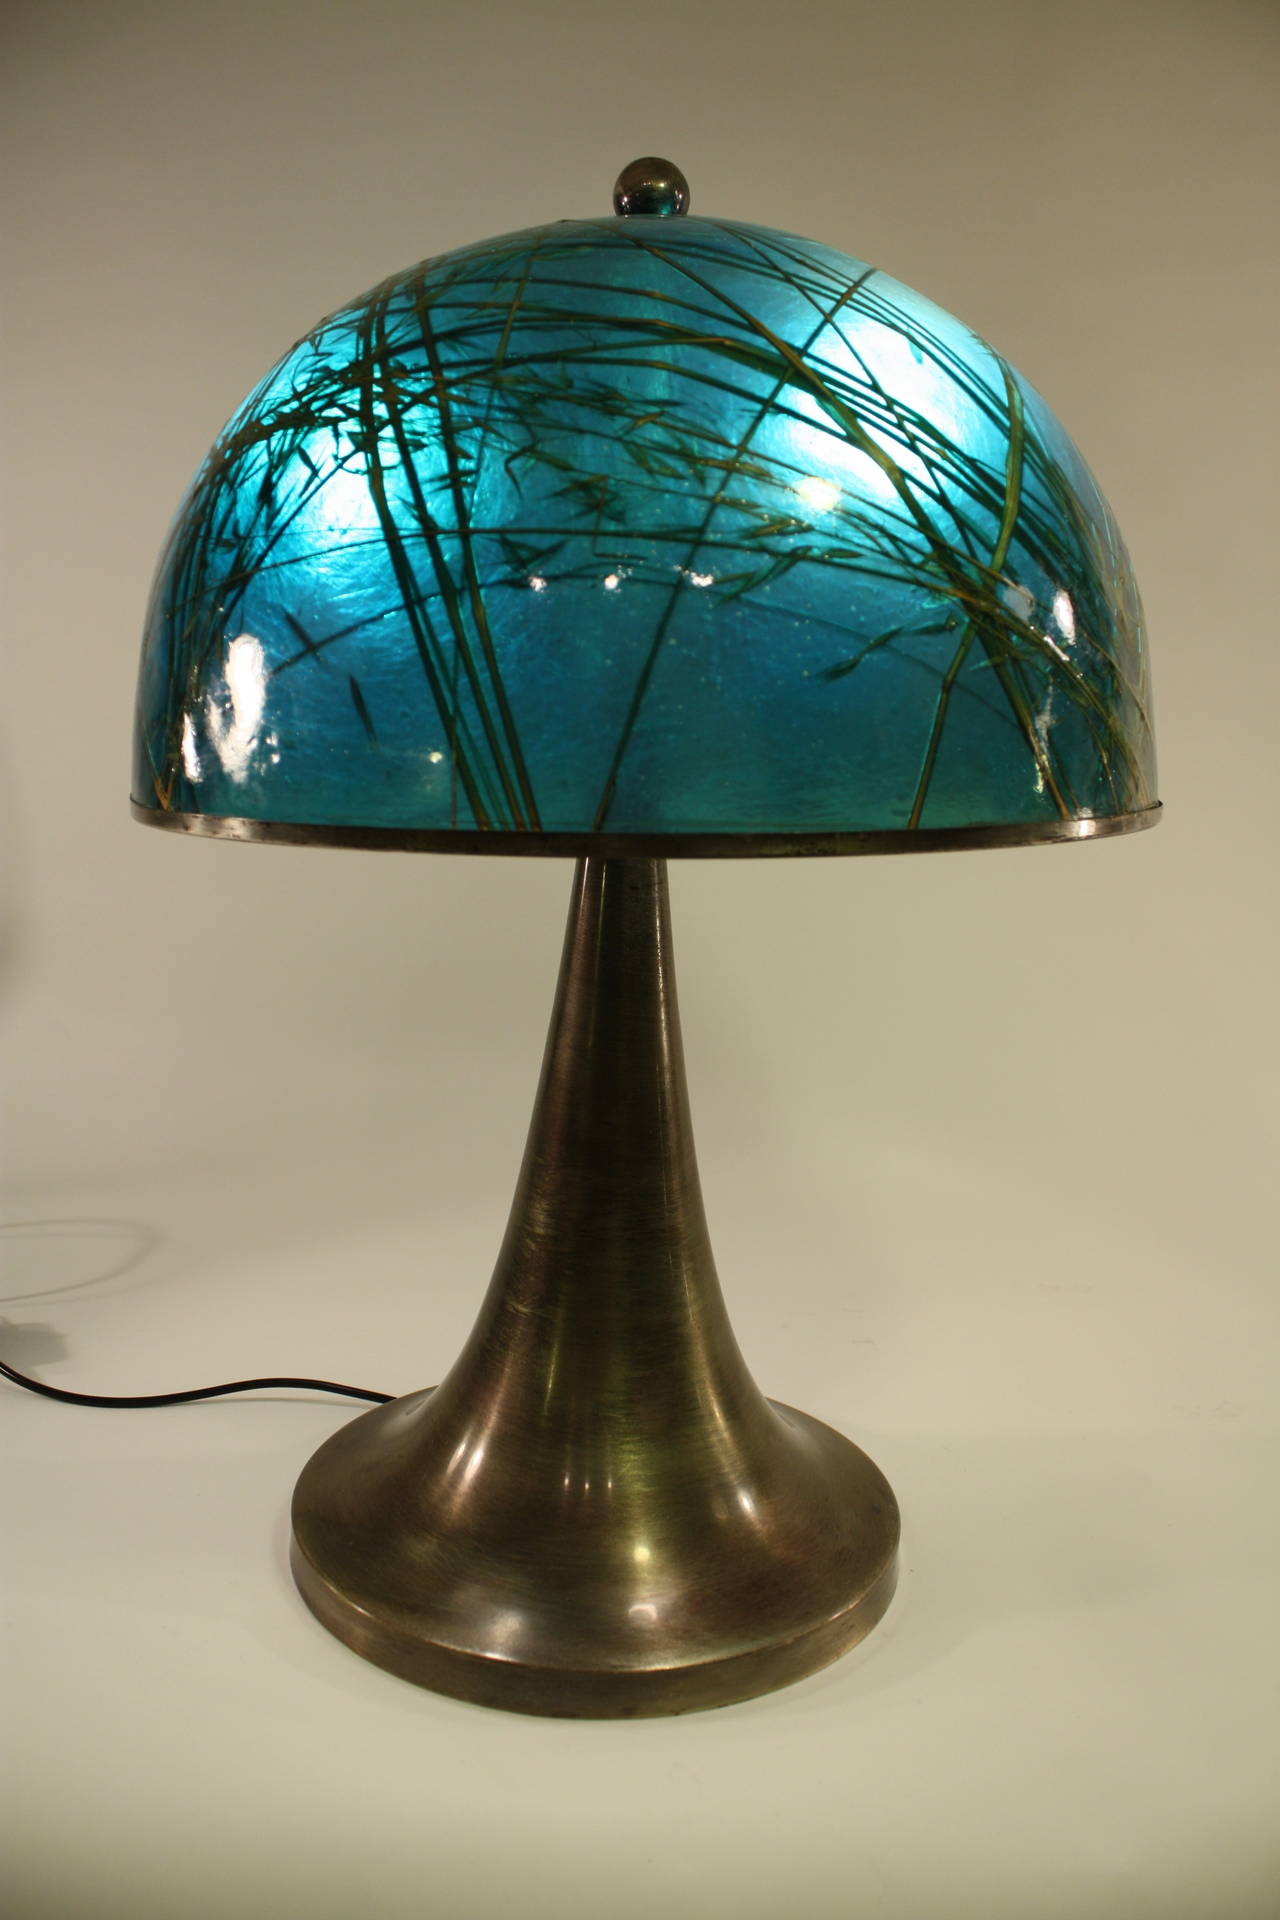 Gorgeous large  lamp with green resin and oats plants inclusions.  Silvered metal base in the style of Gabriela Crespi Fungo lamps.

Spectacular piece finely manufactured. The lampshade has an amazing aqua green/turquoise blue color with 